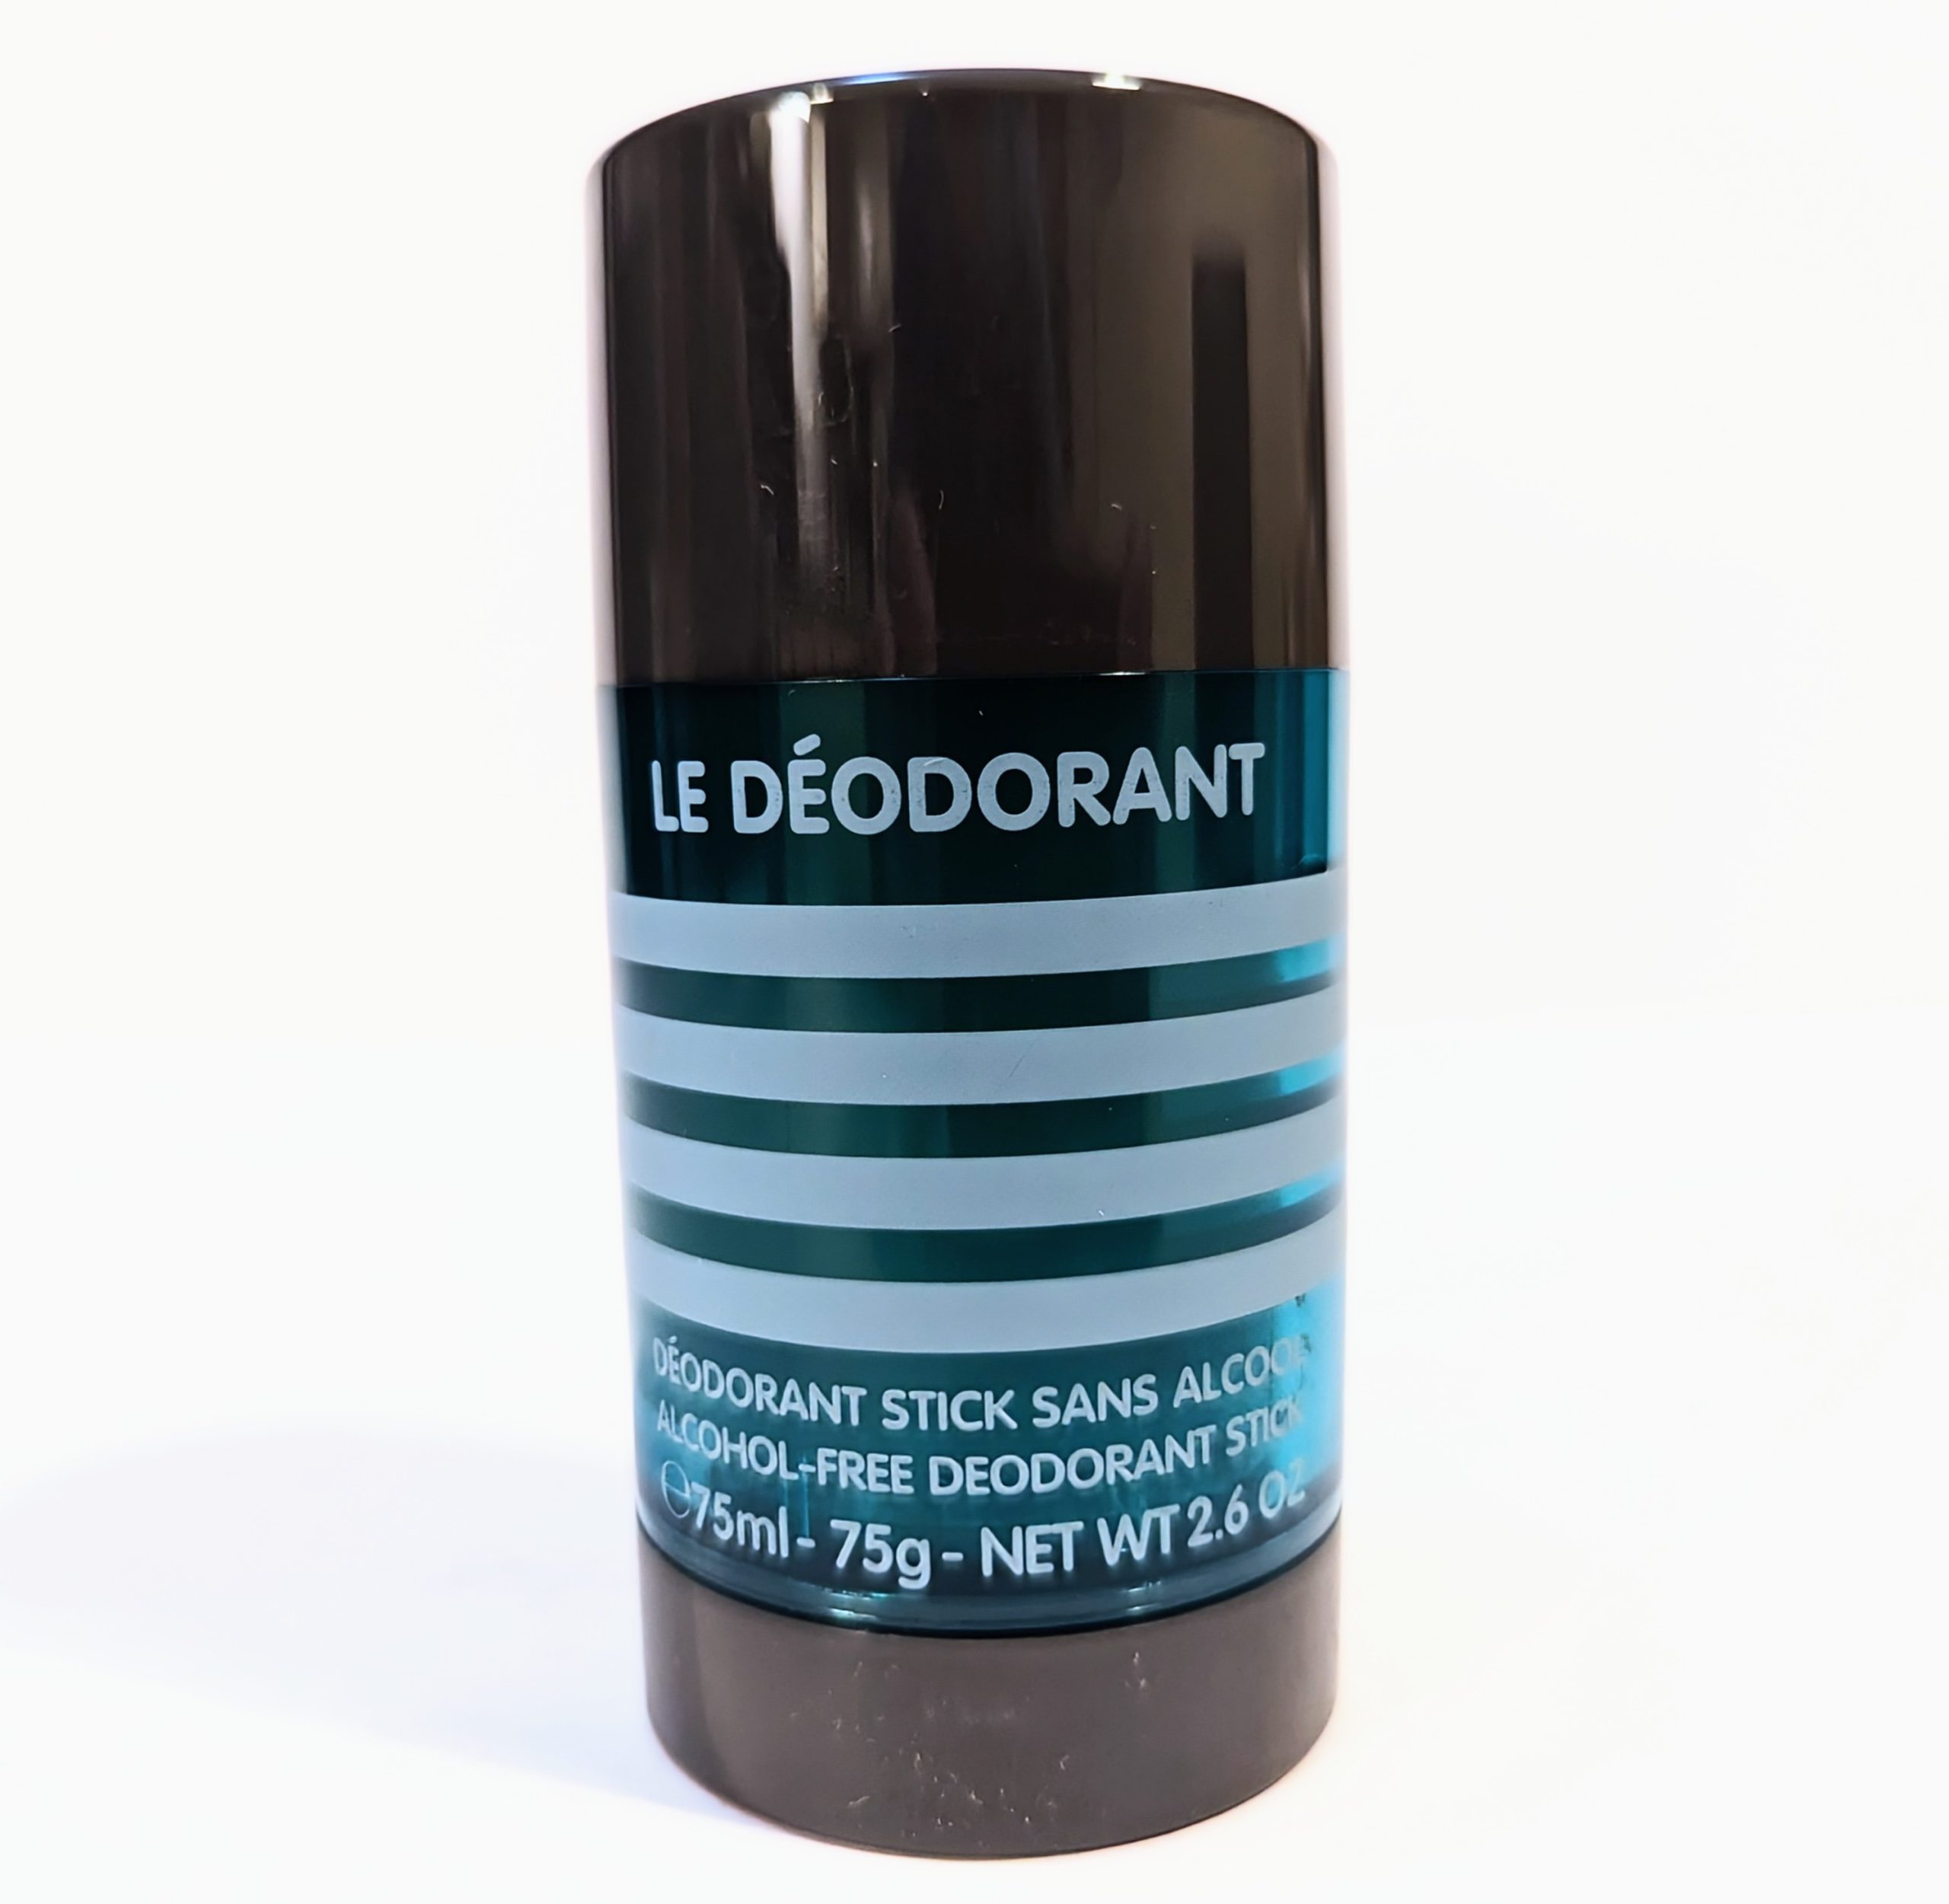 A black cylindrical deodorant stick labeled “Le Déodorant” in blue and white text, noting it is alcohol-free.